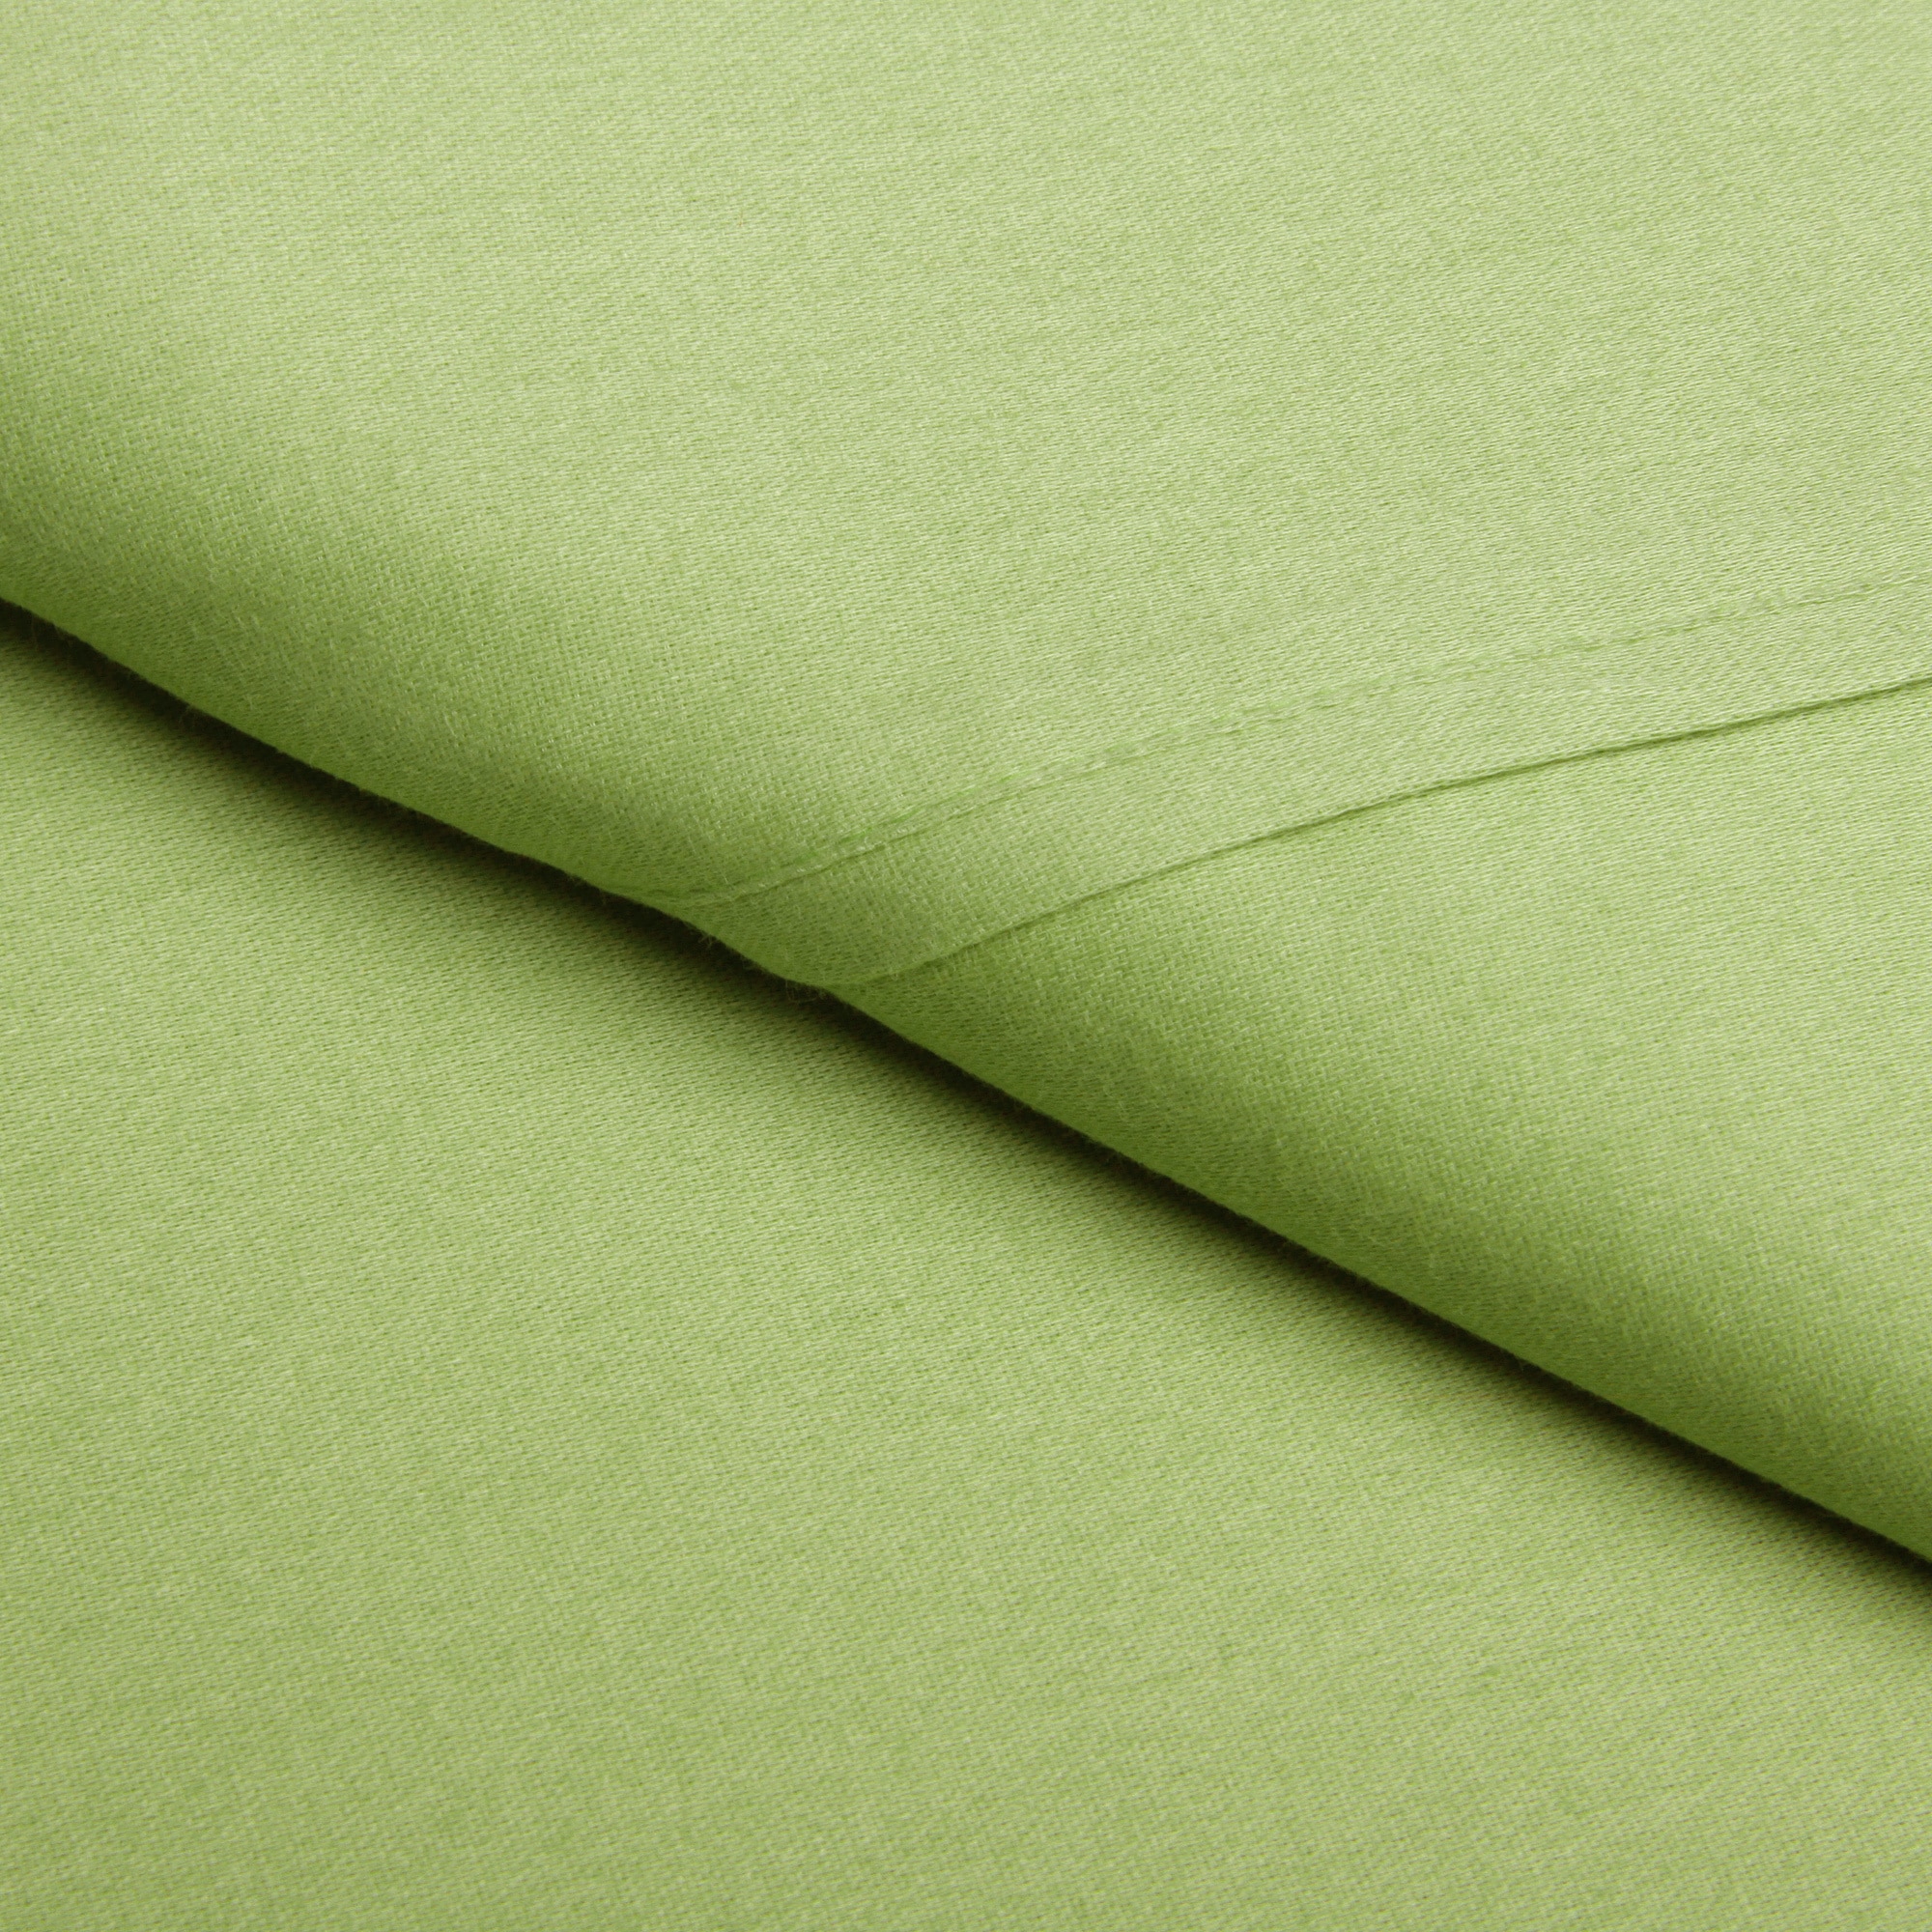 Elite Home Products, Inc Brights Solid Wrinkle Resistant All Cotton Sheet Set Green Size Full